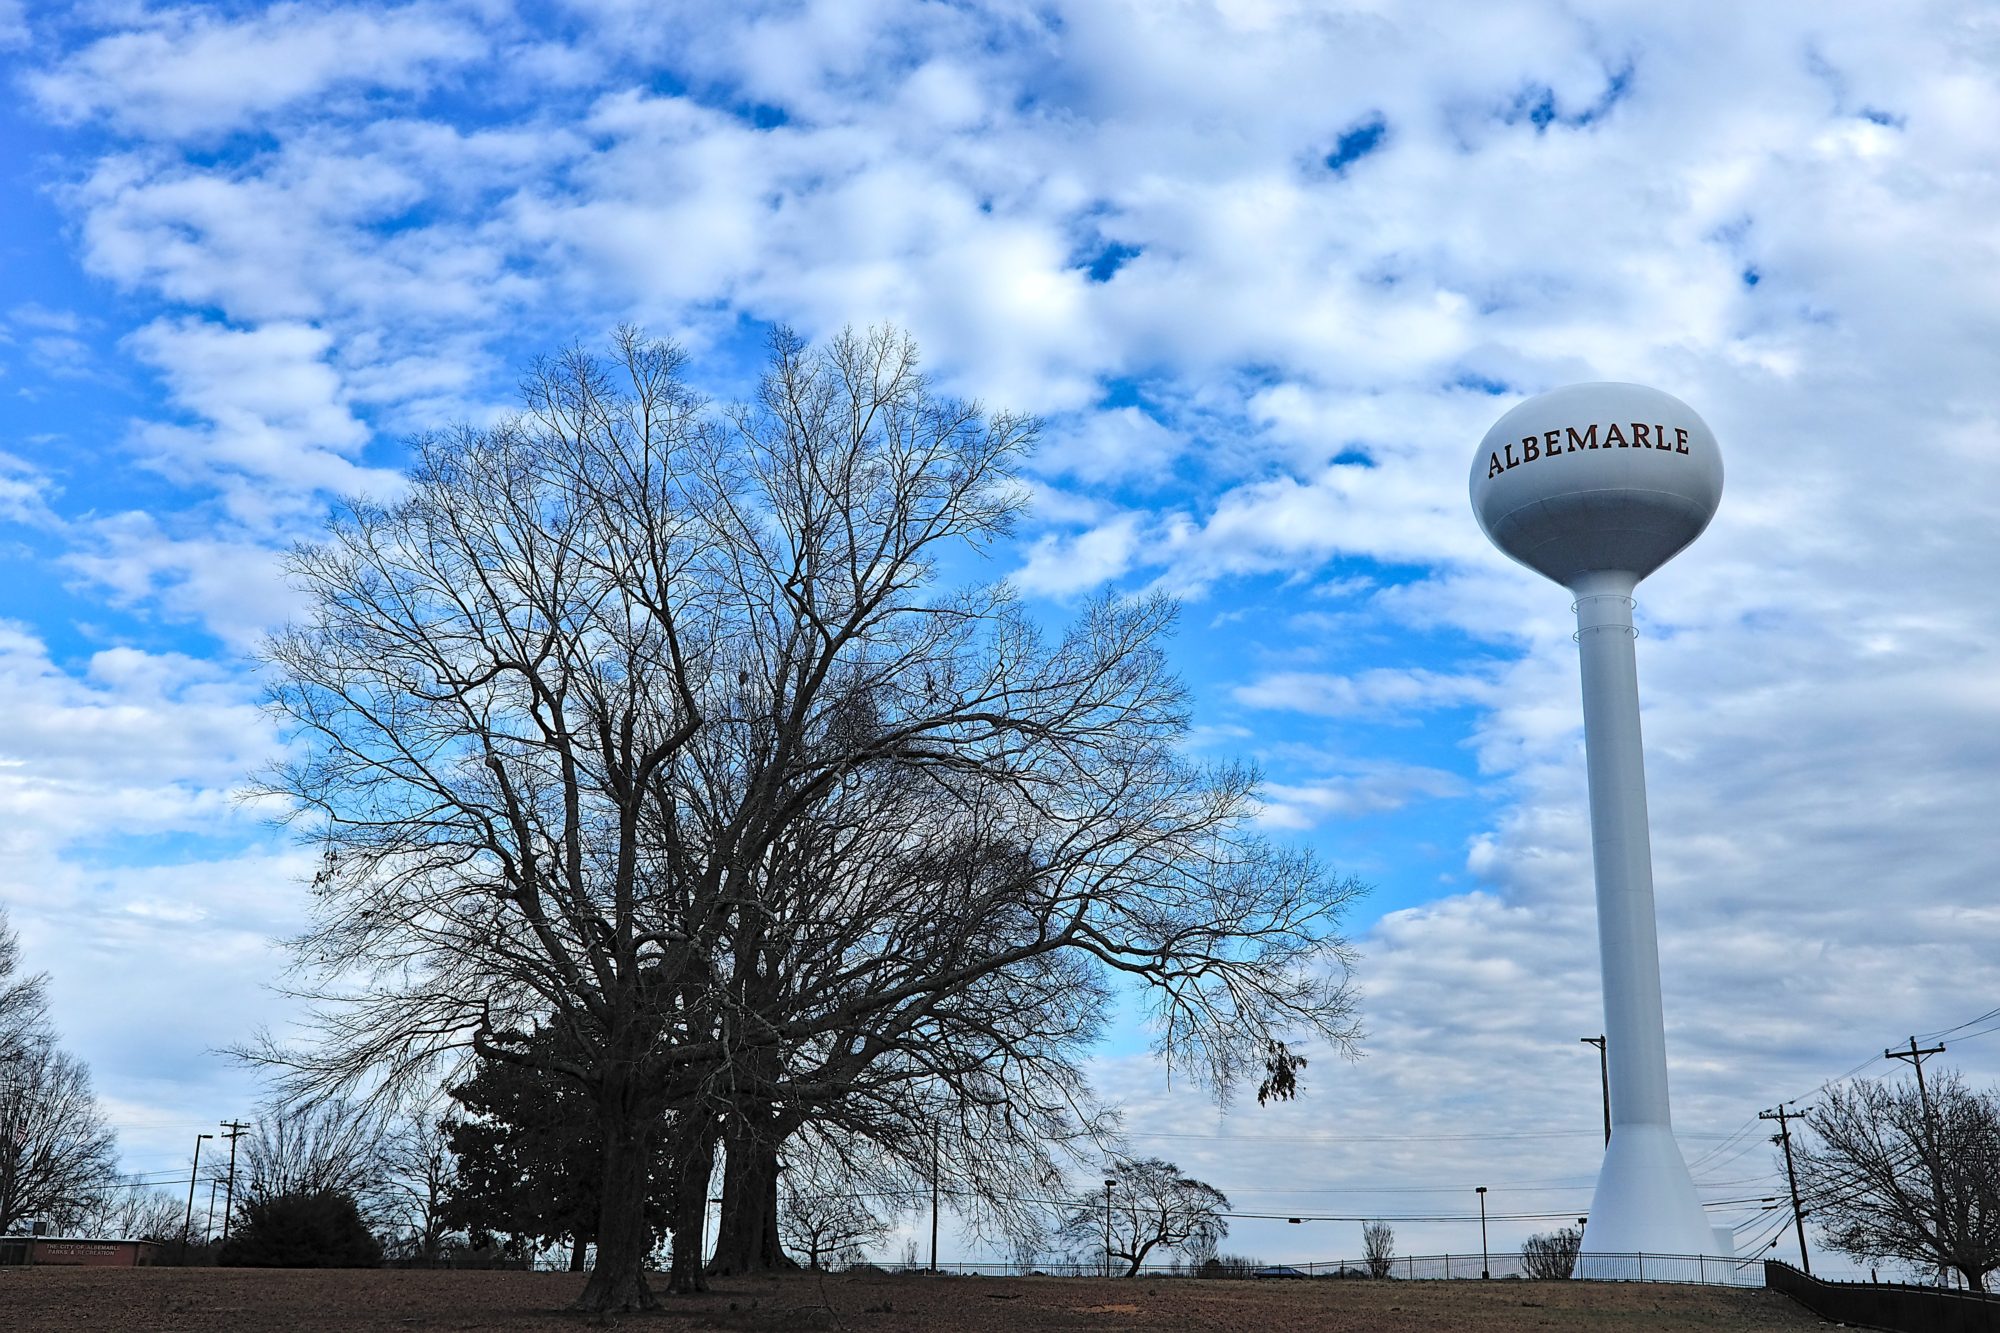 the Albemarle Water Tower stands tall and reads "Albemarle"